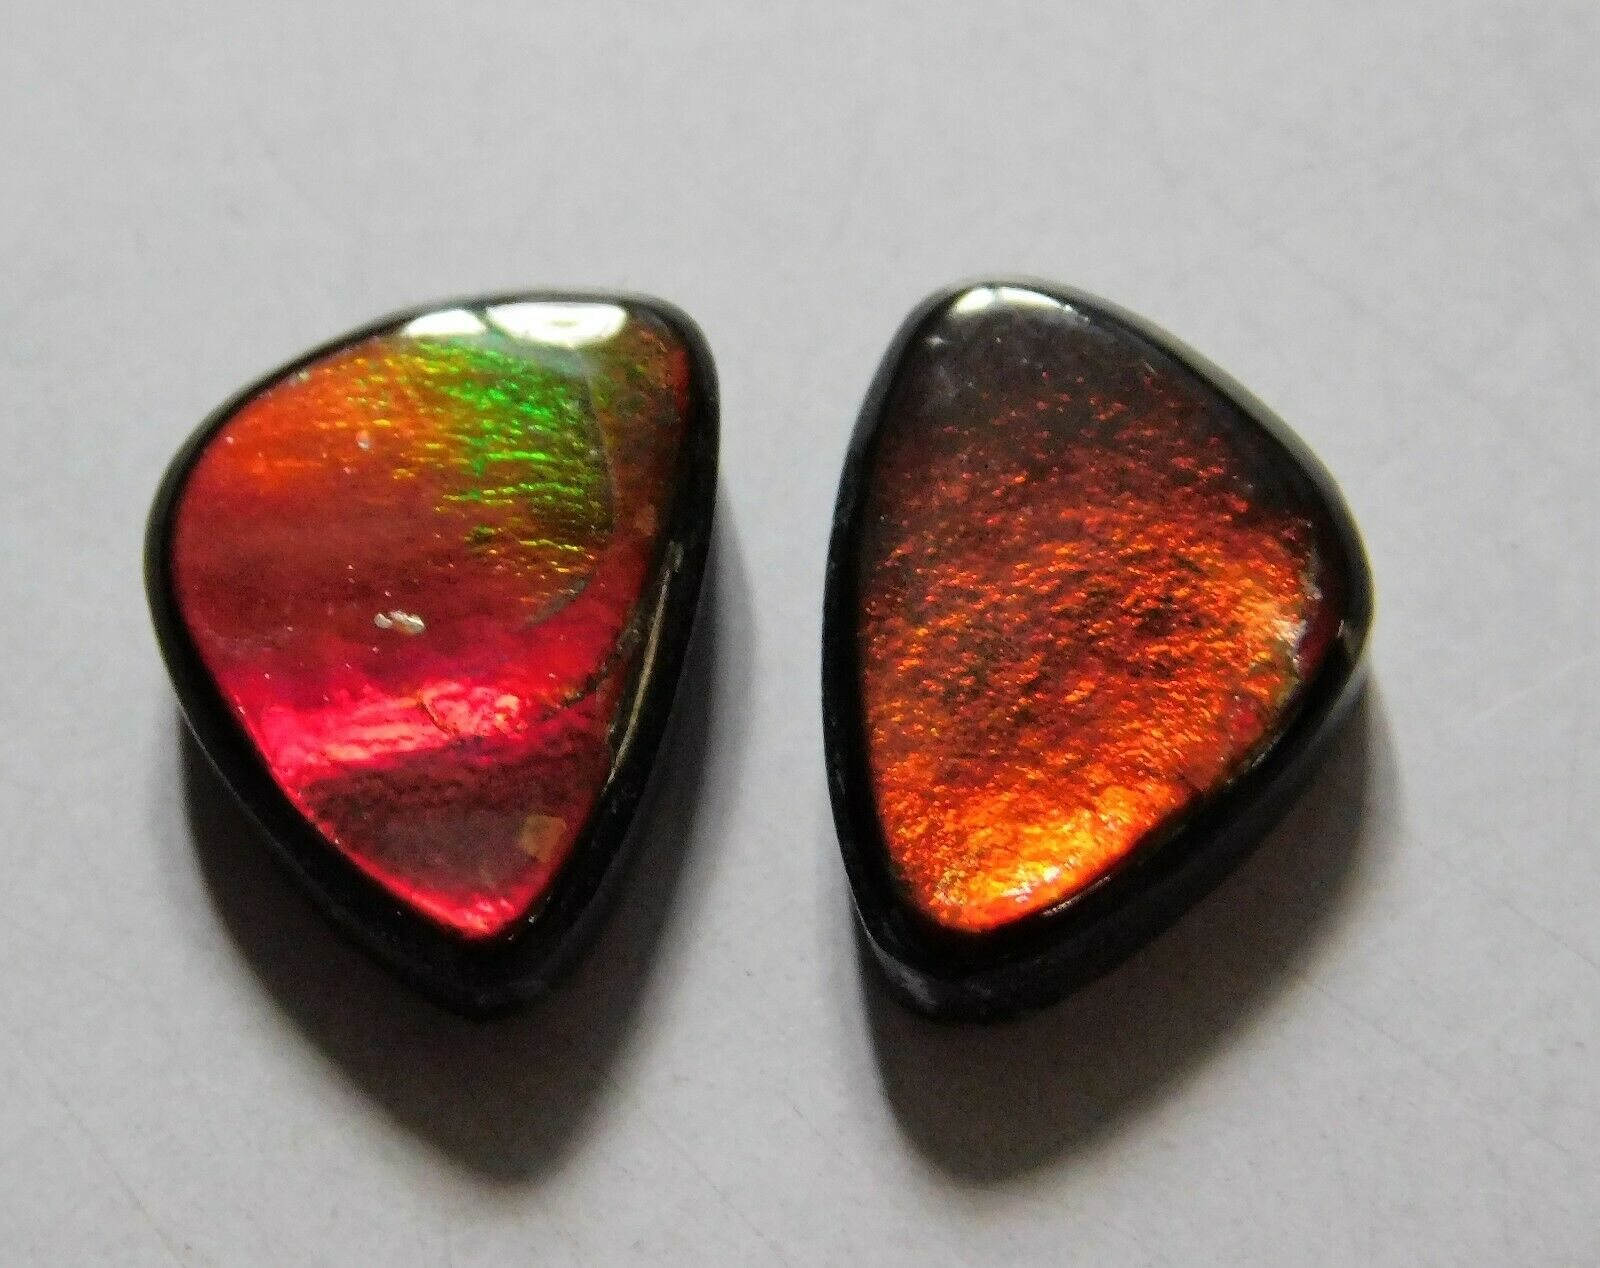 7.85 Cts Natural Ammolite (12mm X 8.7mm Each) Loose Cabochon Match Pair Td46